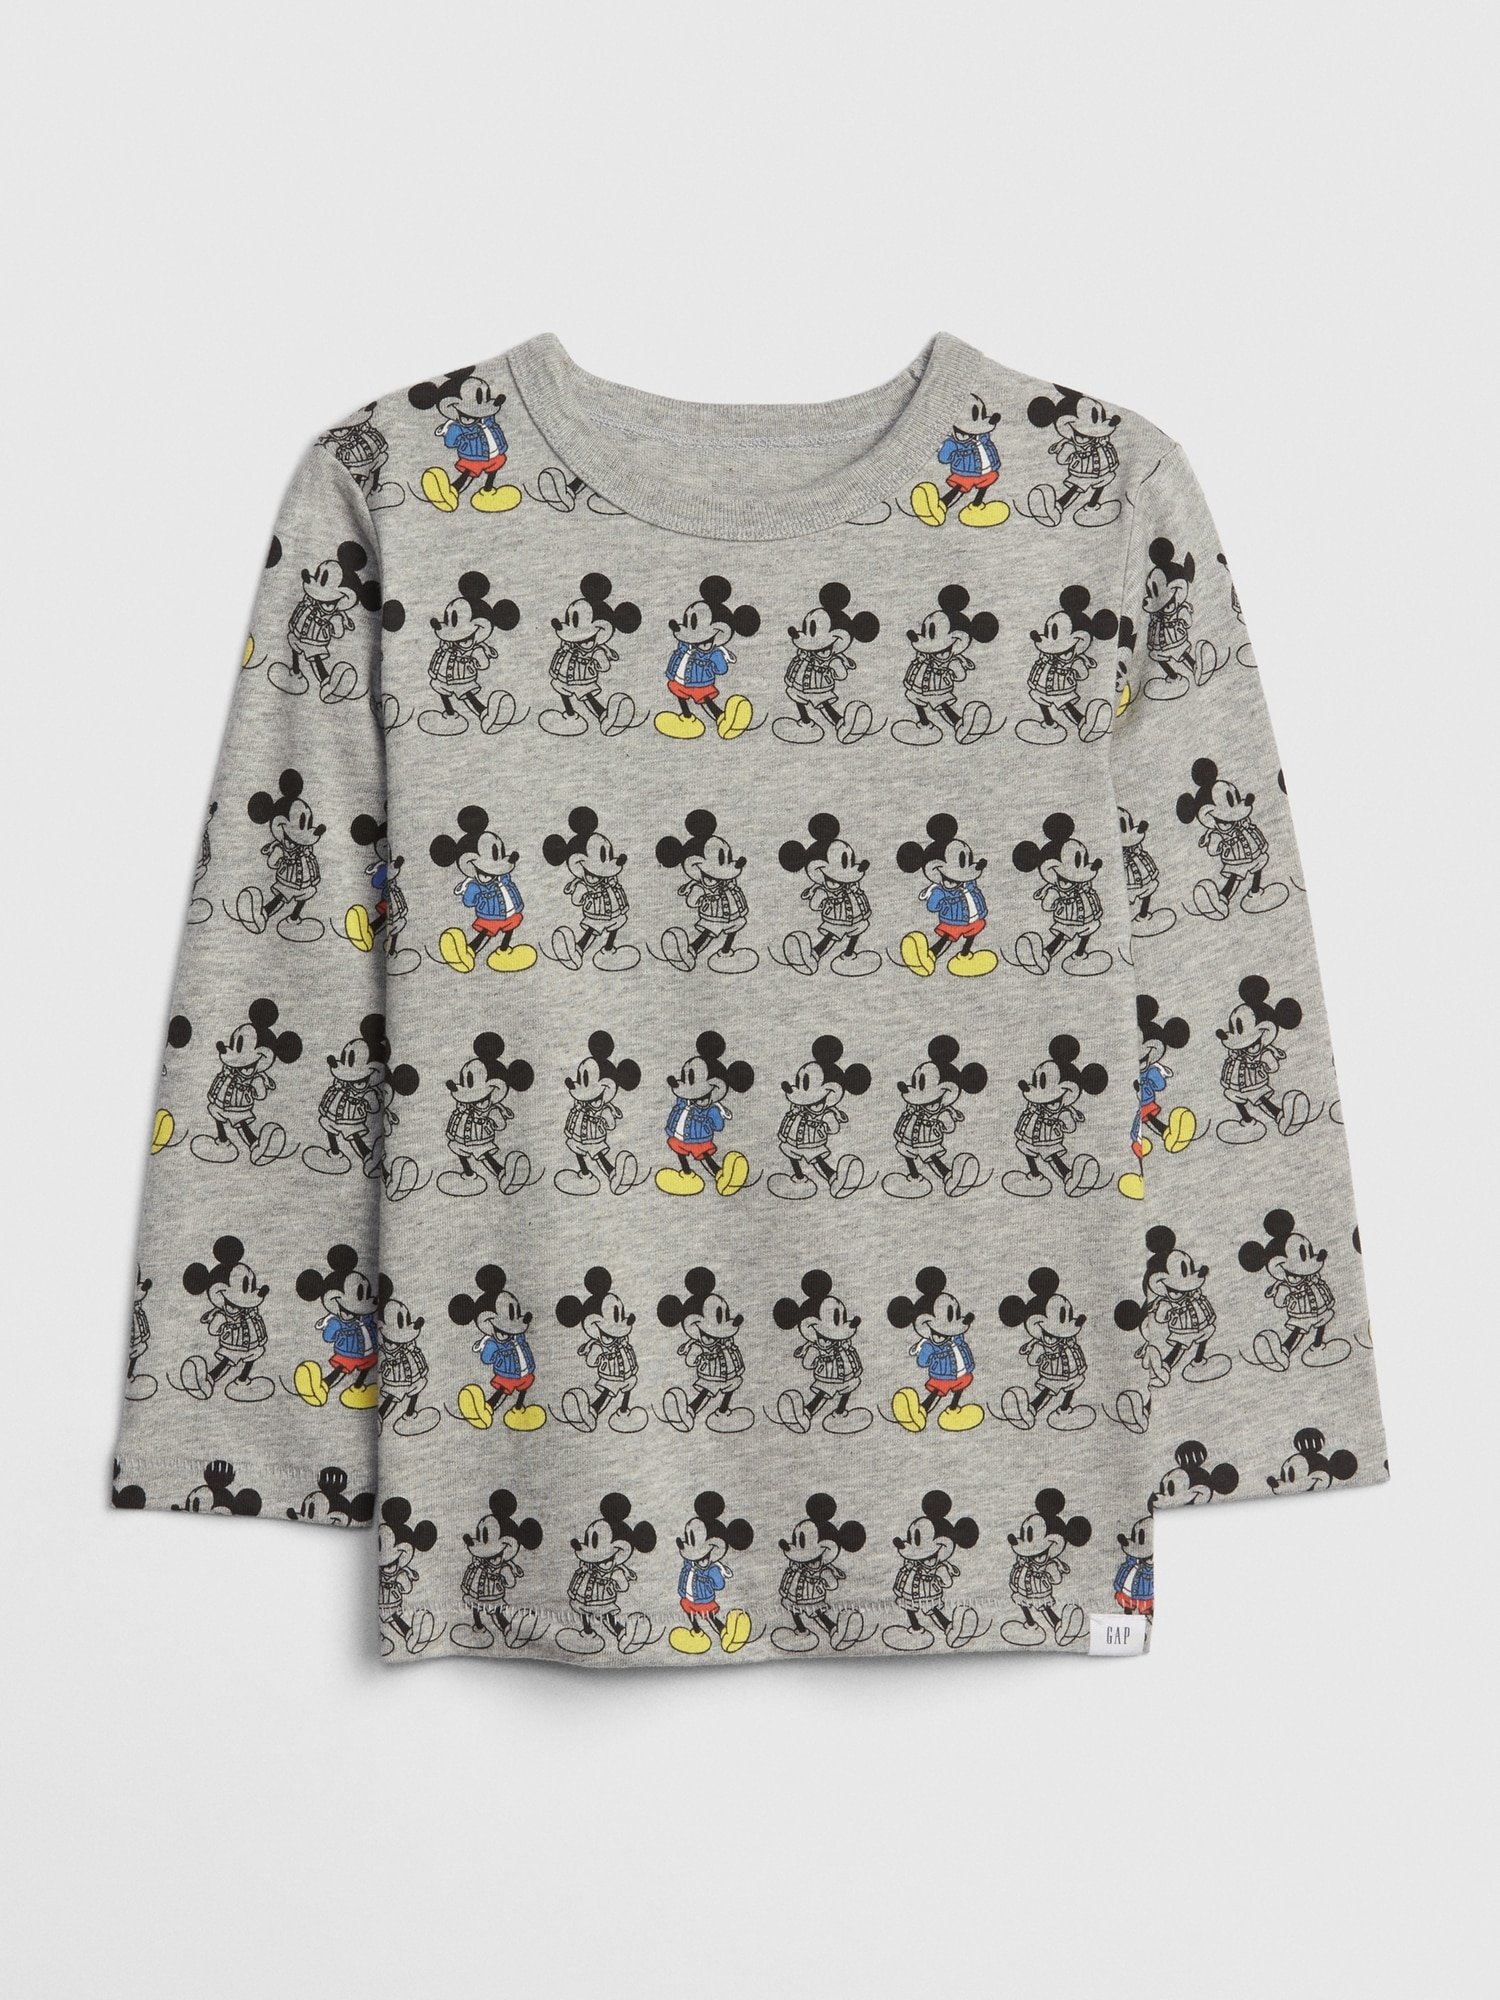 Disney Mickey Mouse T-shirt product image